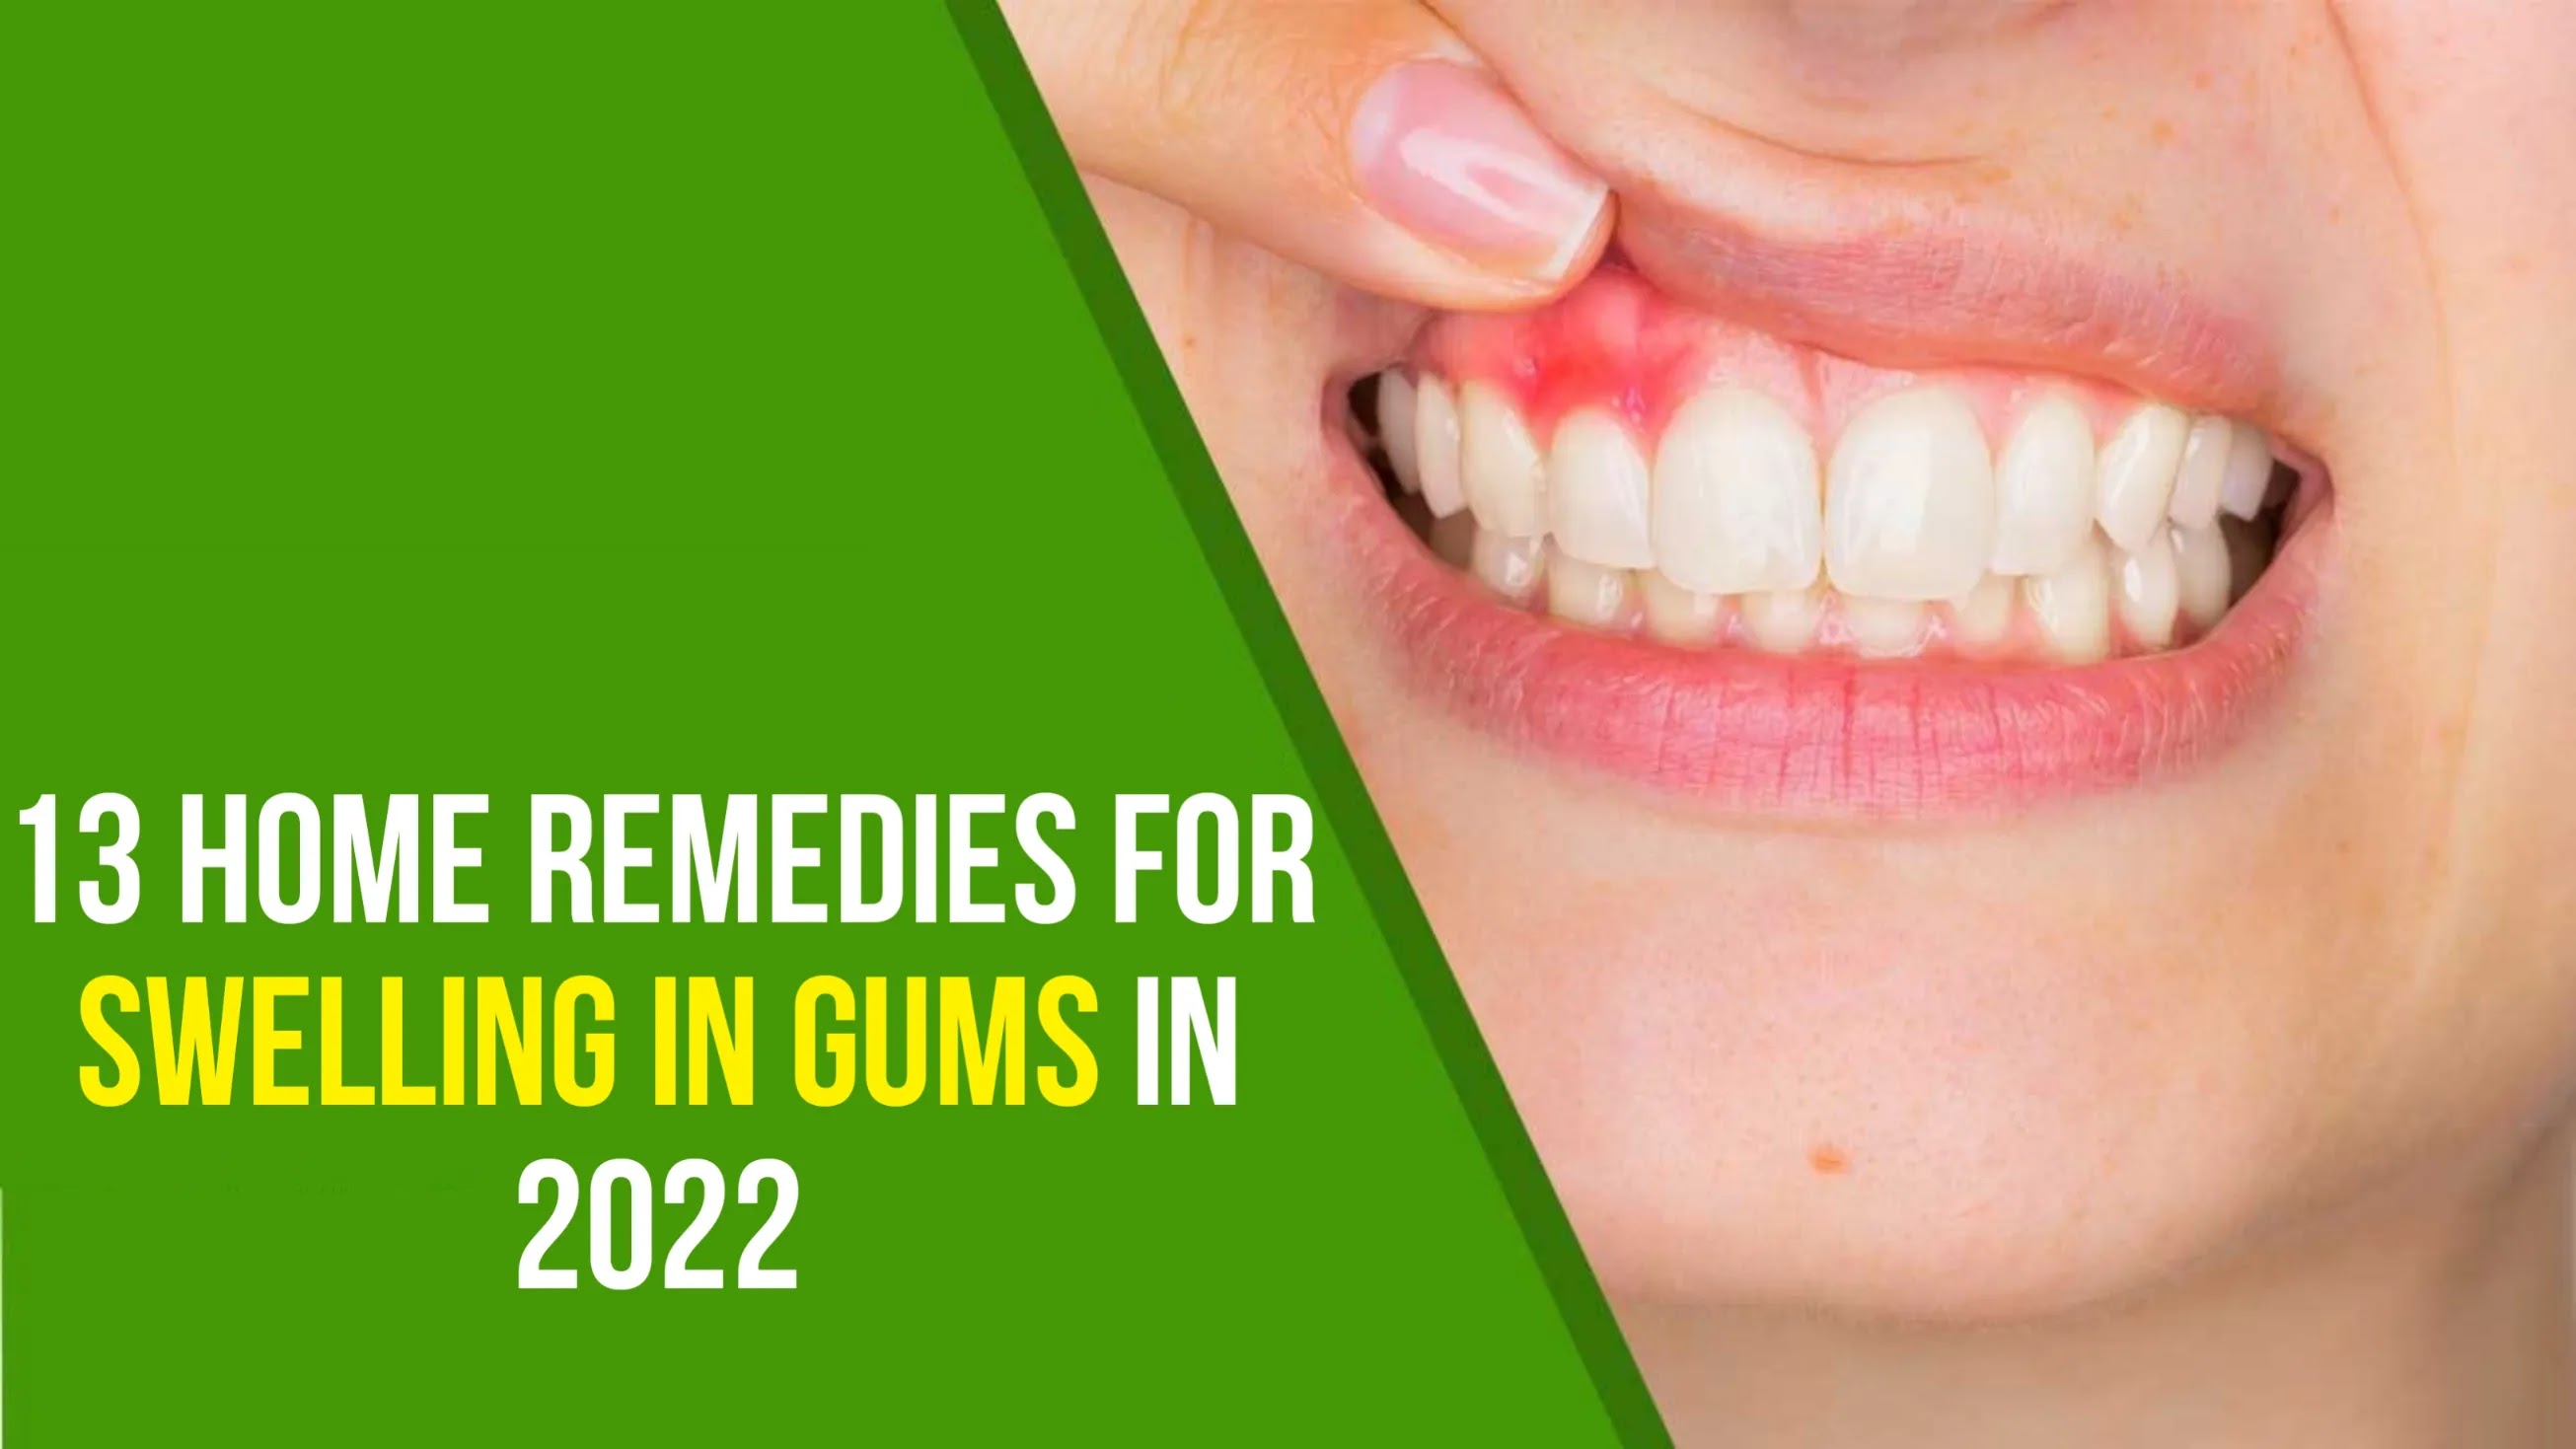 Home Remedies for Swelling in Gums in 2022